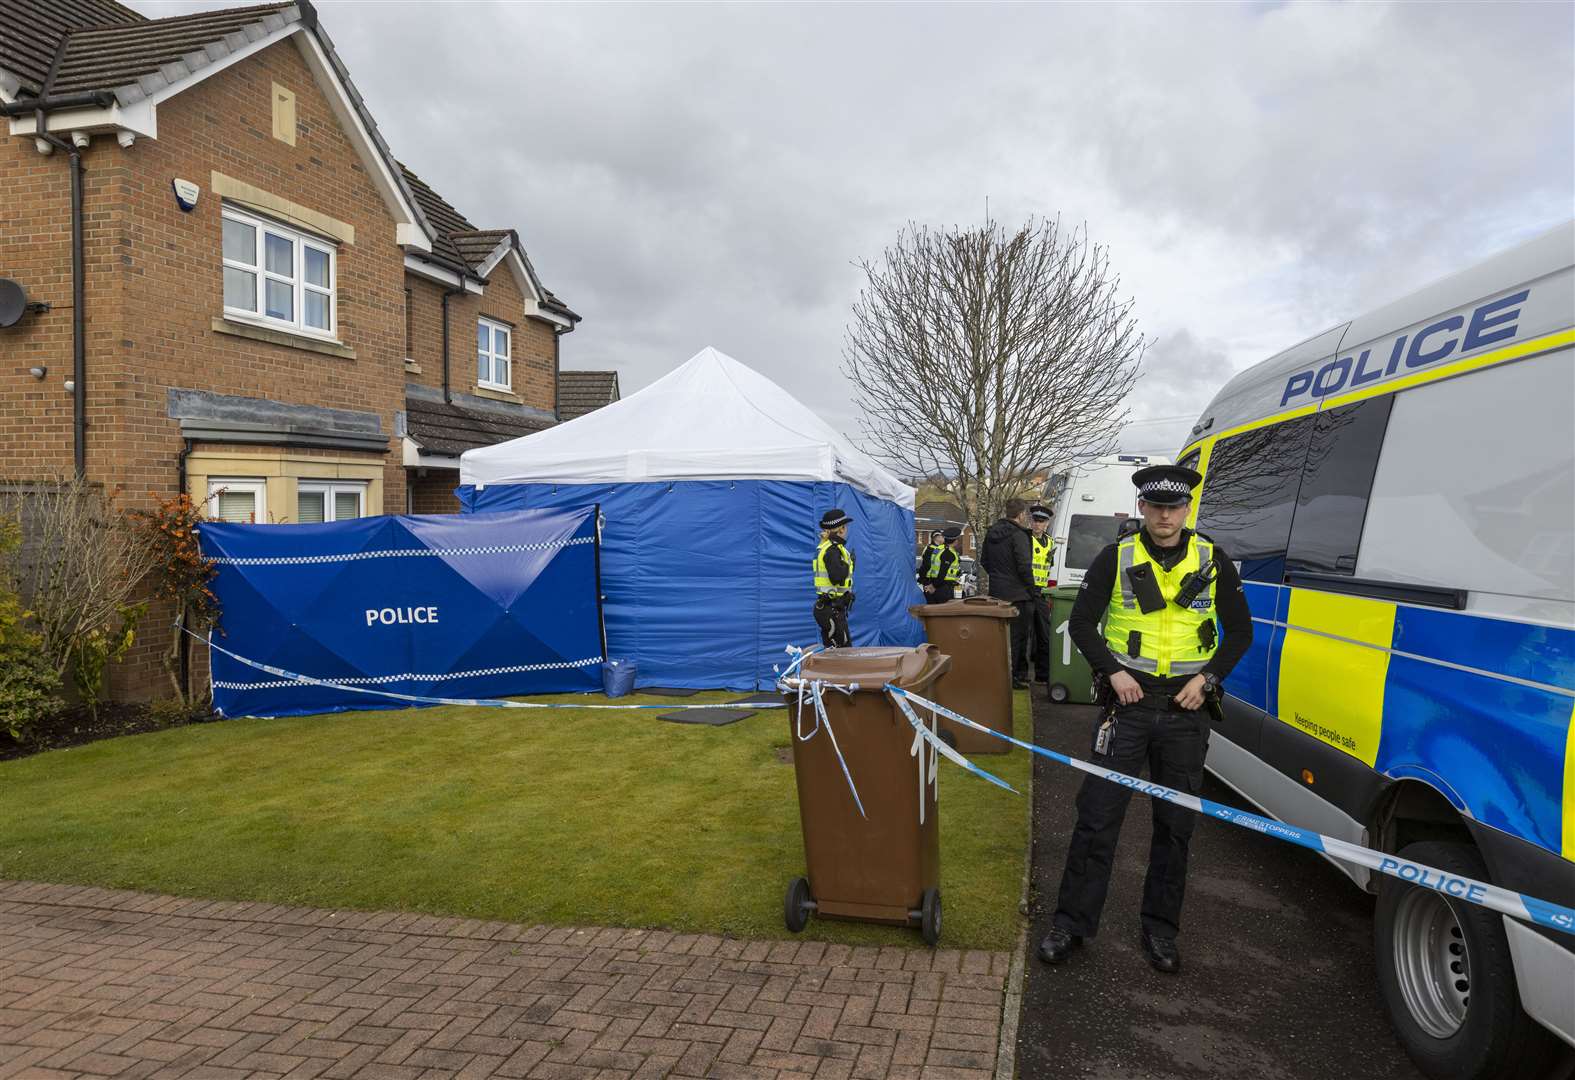 Police officers continued the search of the home on Thursday (Robert Perry/PA)